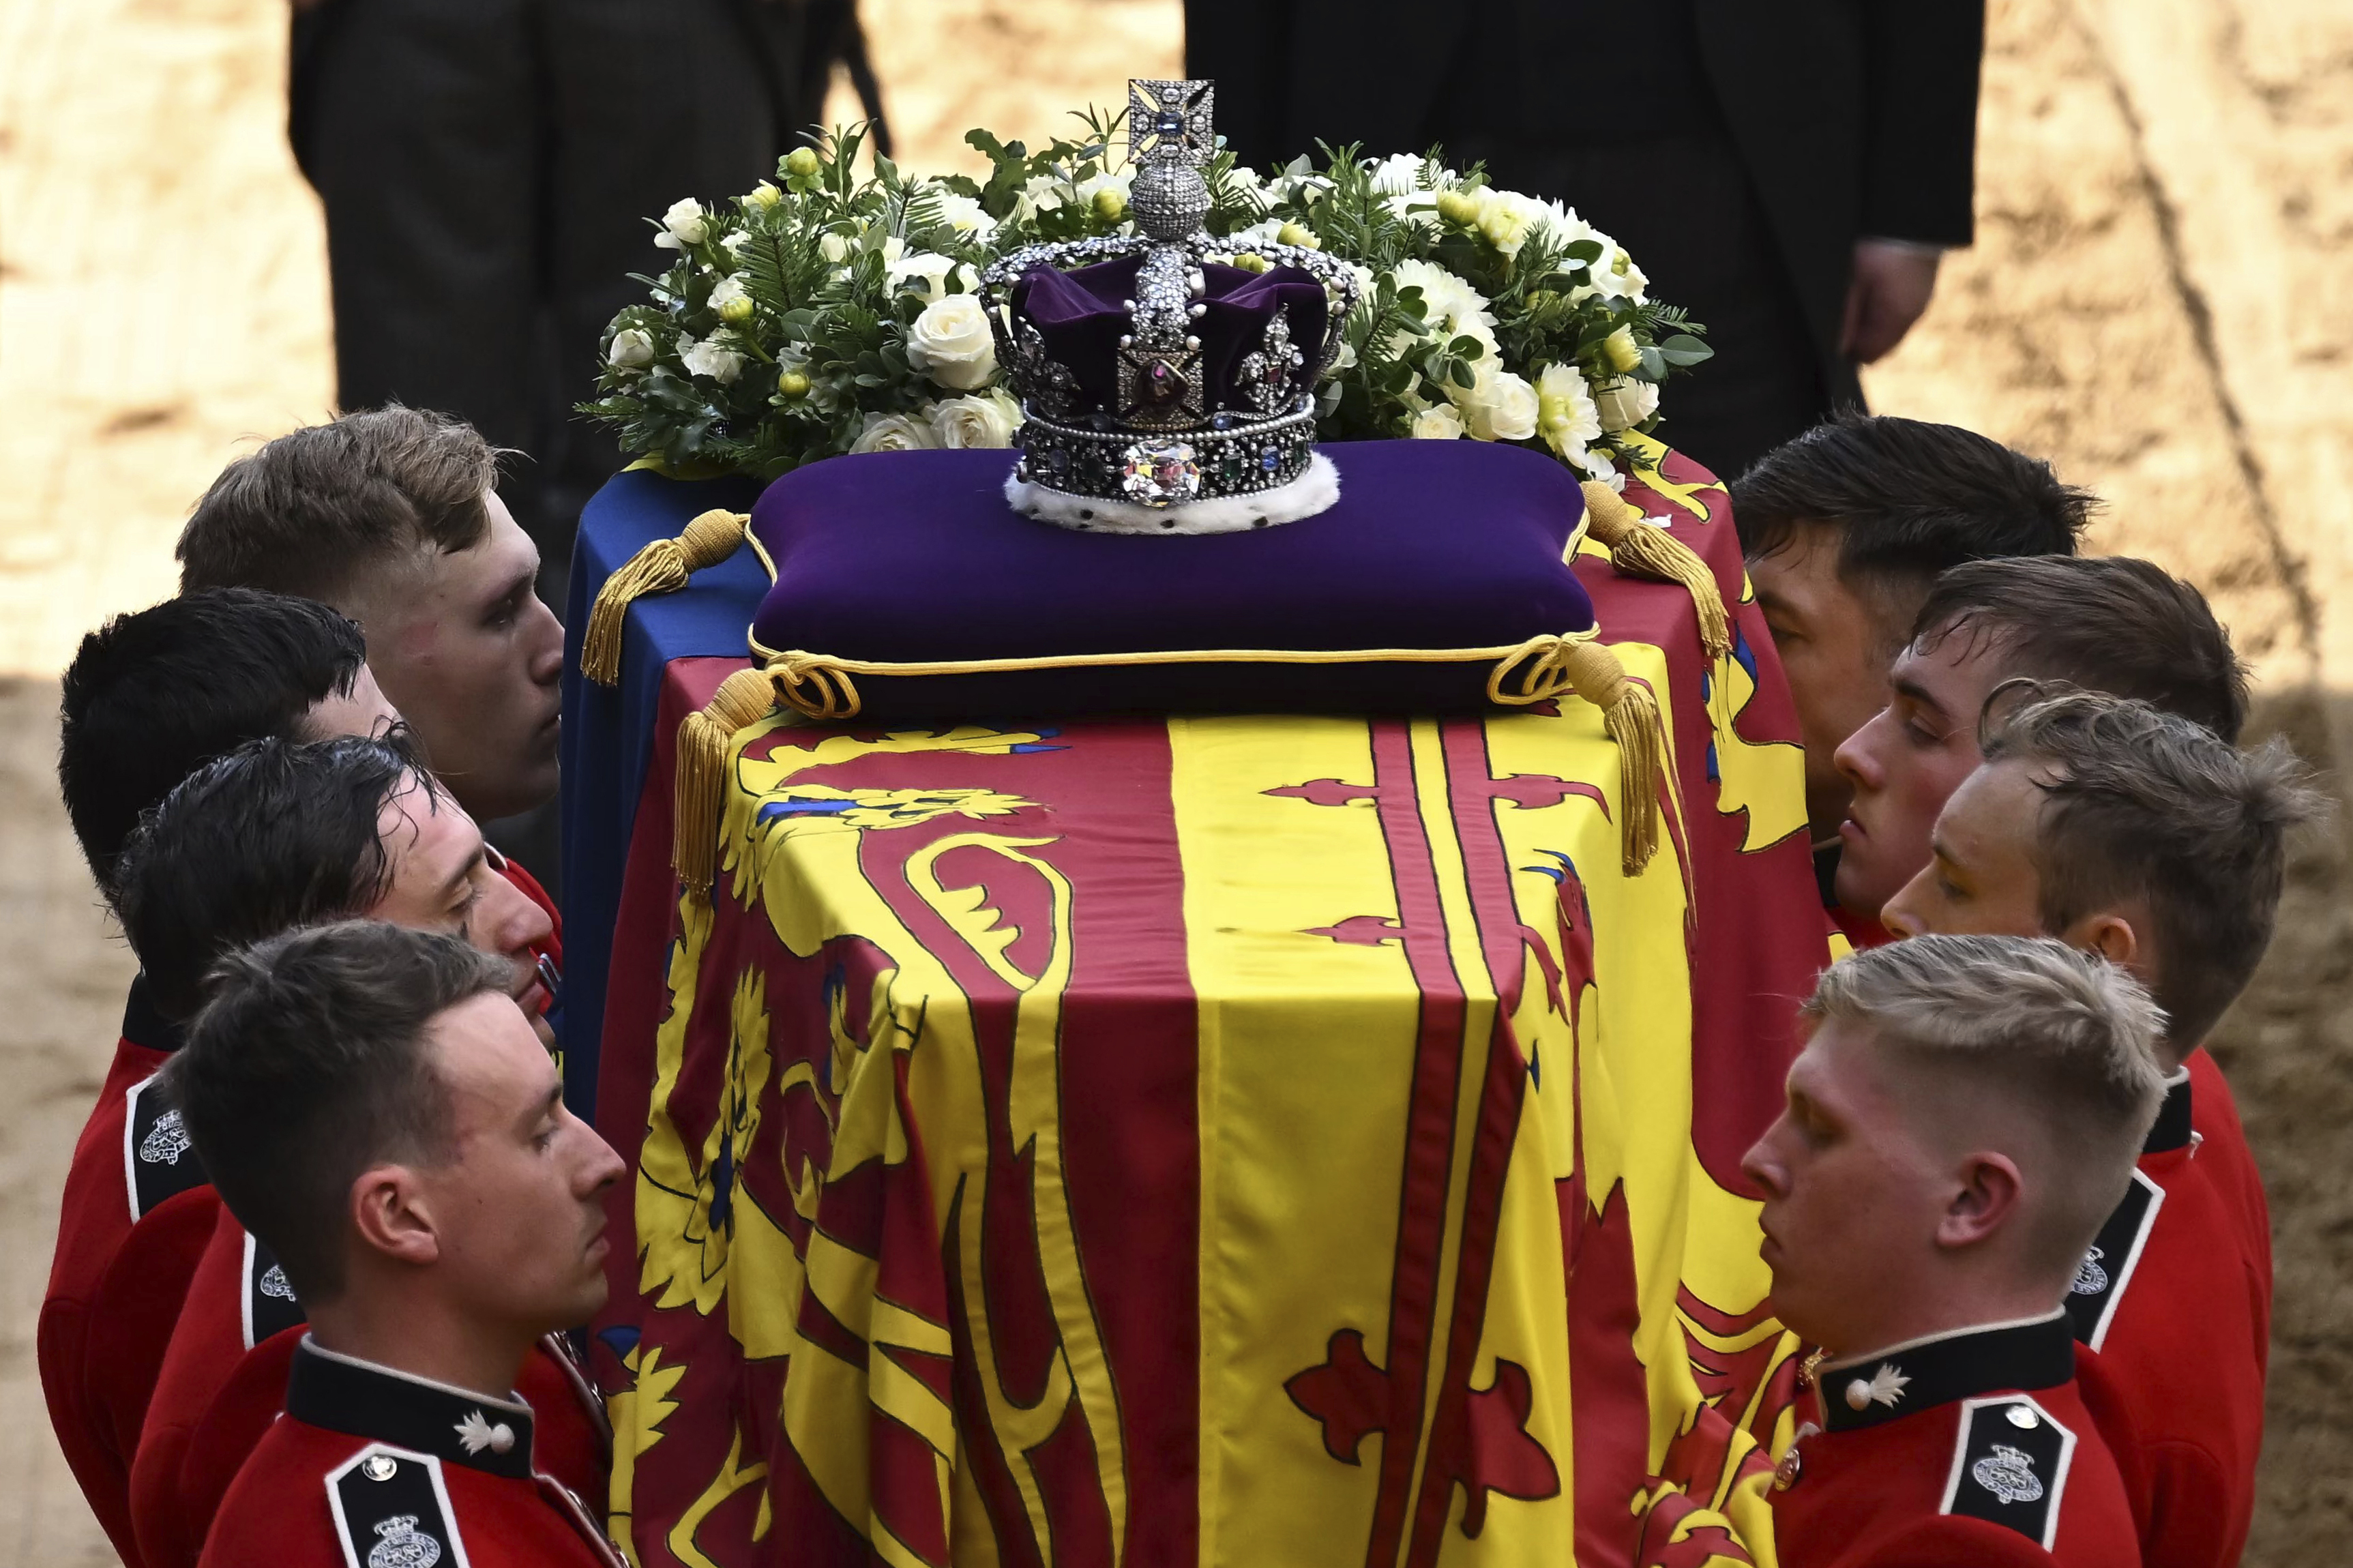 Pallbearers from The Queen's Company, 1st Battalion Grenadier Guards prepare to carry the coffin of Queen Elizabeth II into Westminster Hall at the Palace of Westminster in London, Wednesday, Sept. 14, 2022. (Ben Stansall/Pool via P)